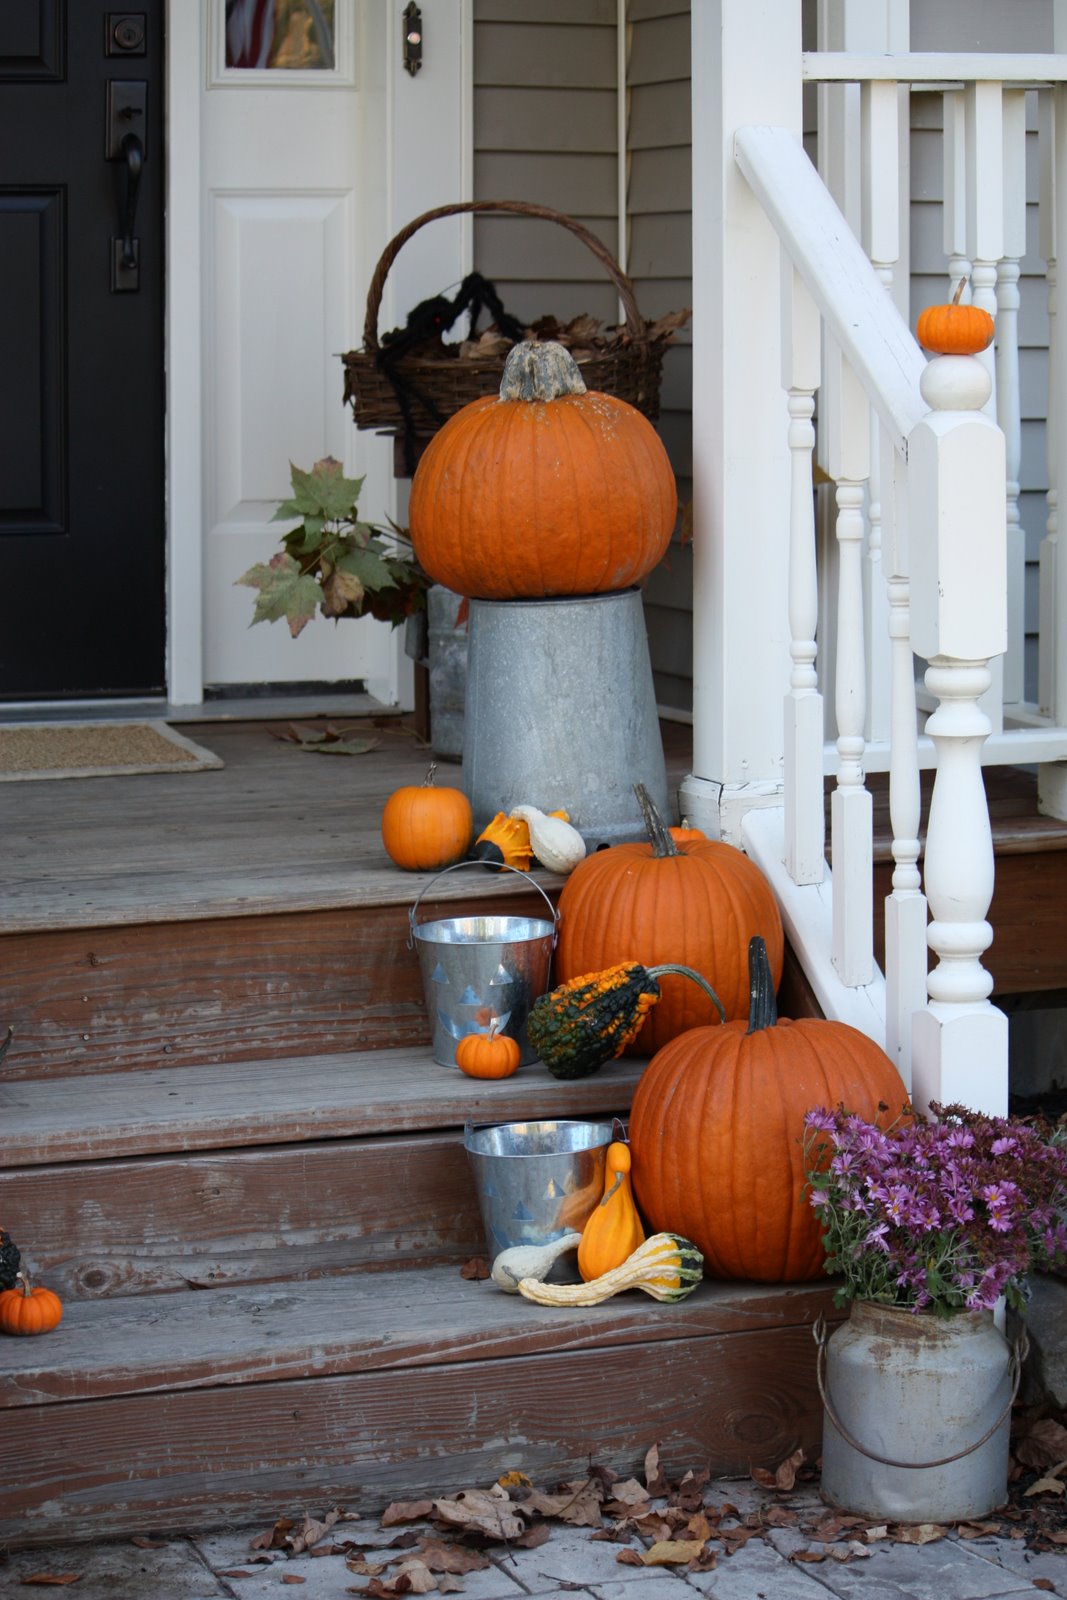 5 Easy Fall Decorating Ideas for your Home. | Muddle Up